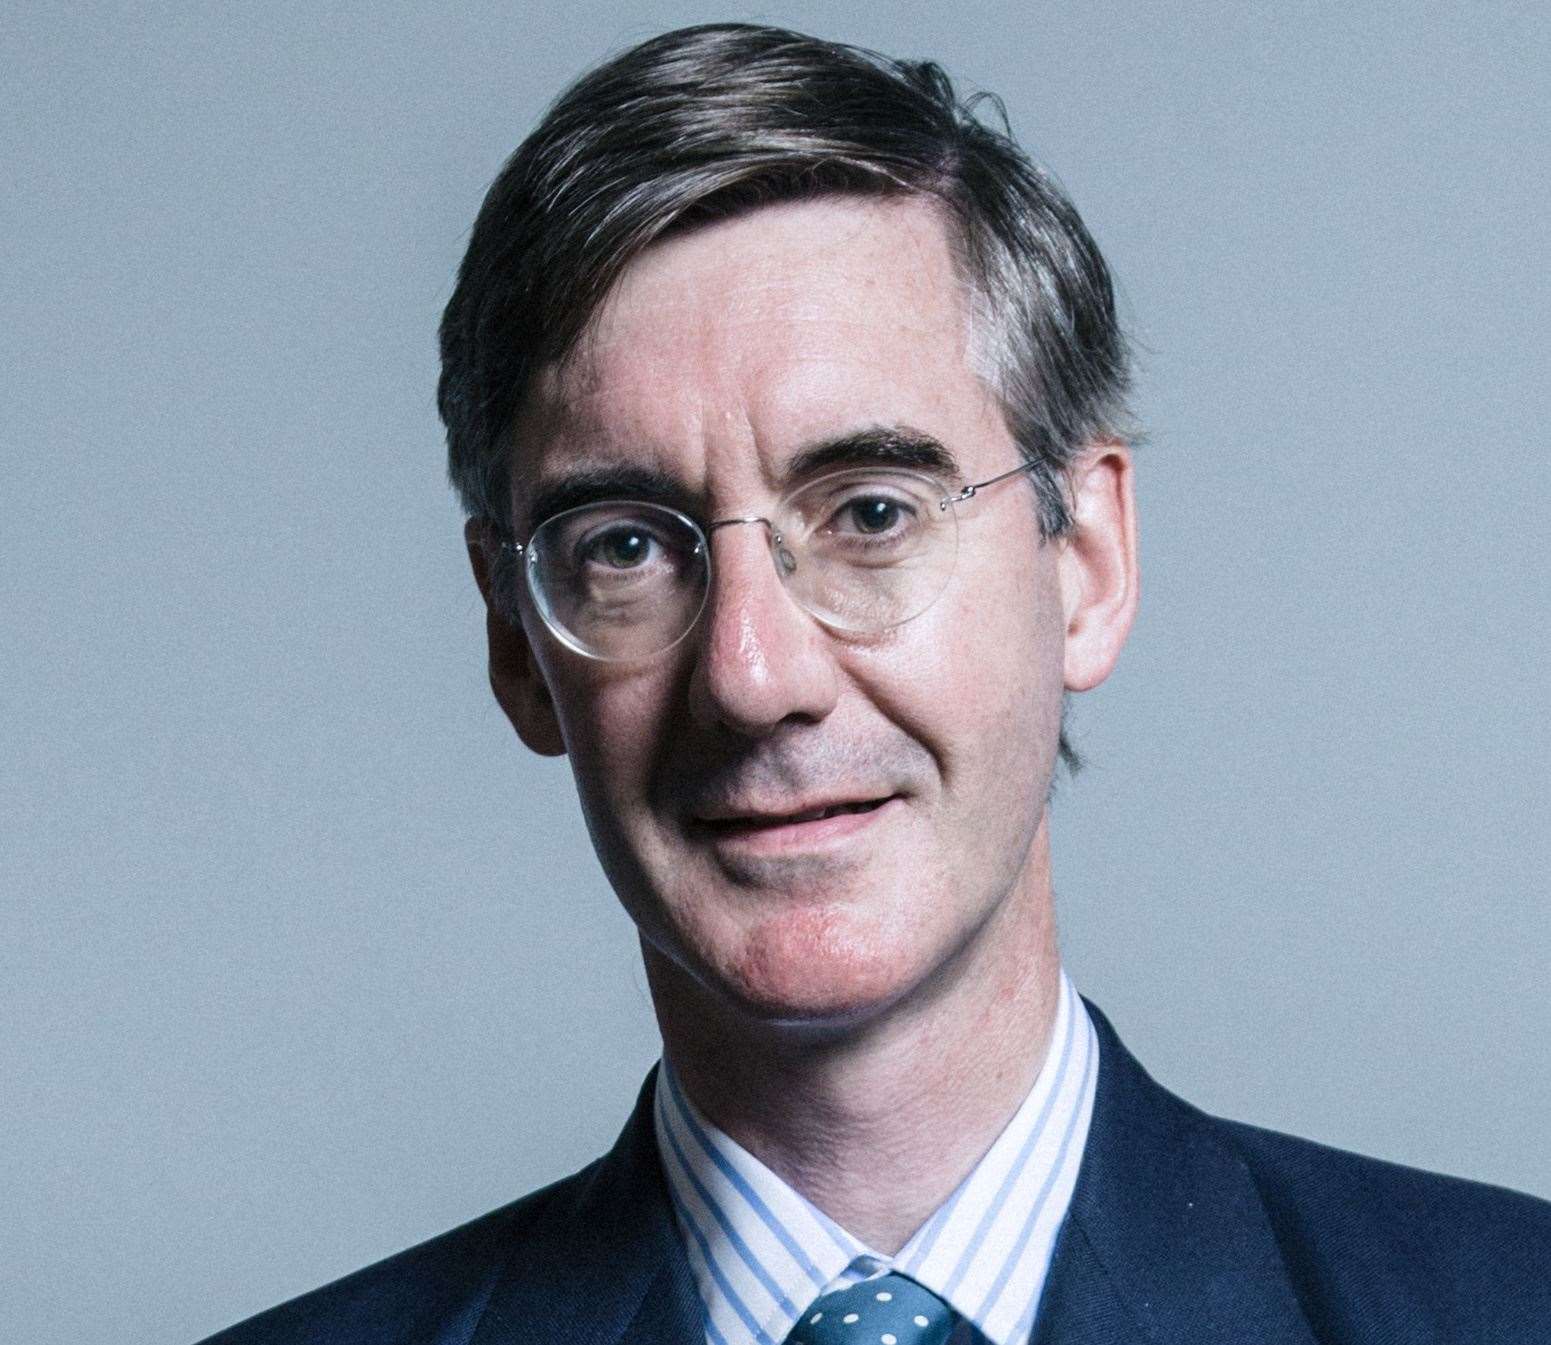 Jacob Rees-Mogg branded the plans '\crazy'